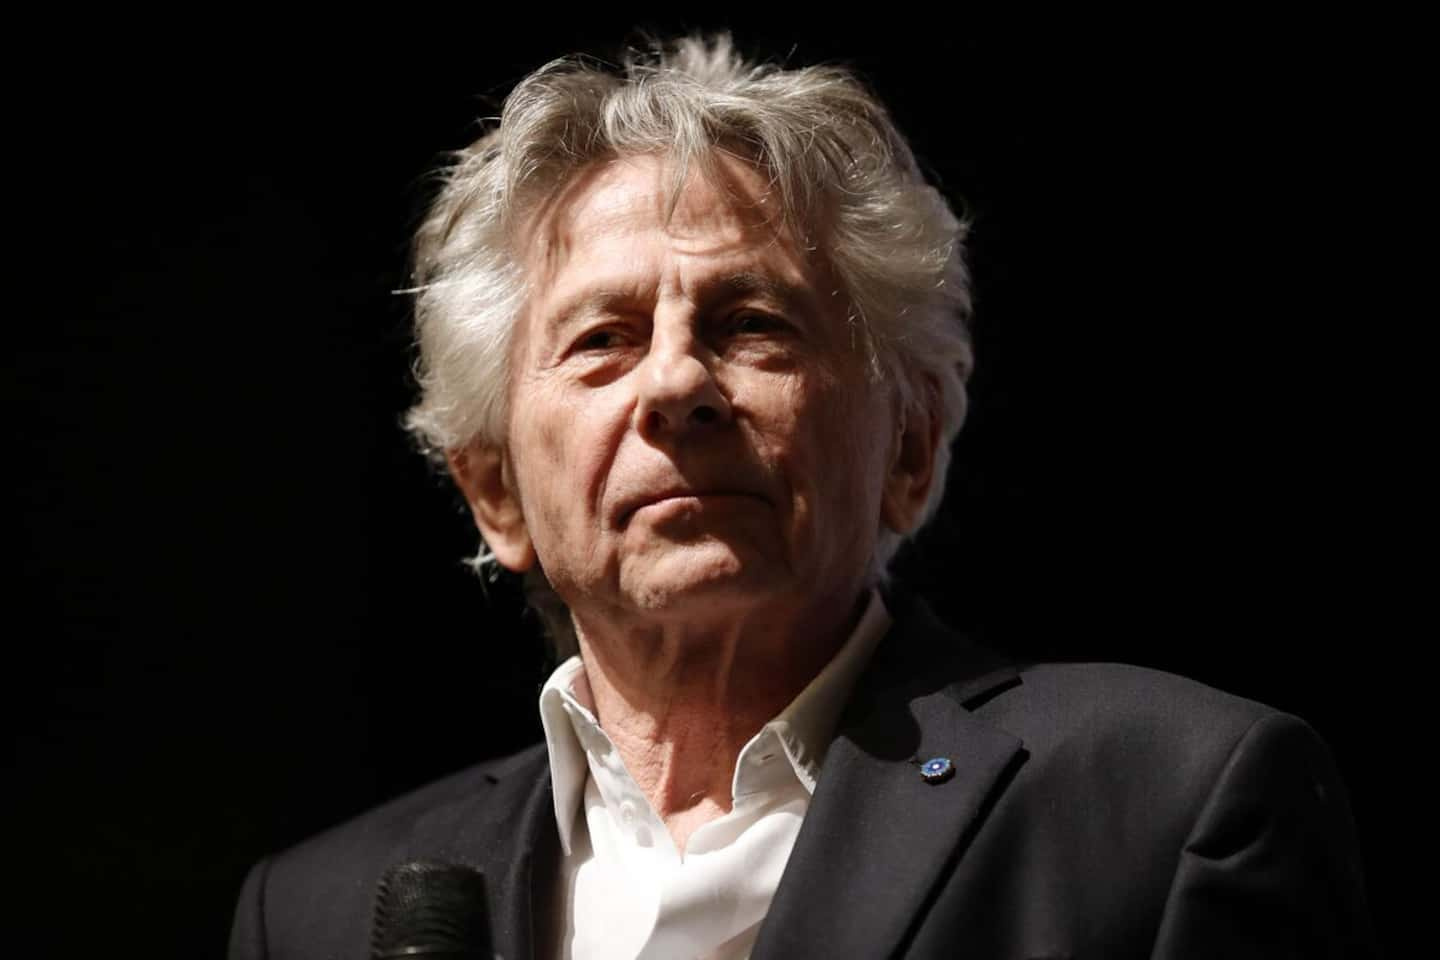 Green light from the prosecutor for the publication of a testimony in the Polanski case